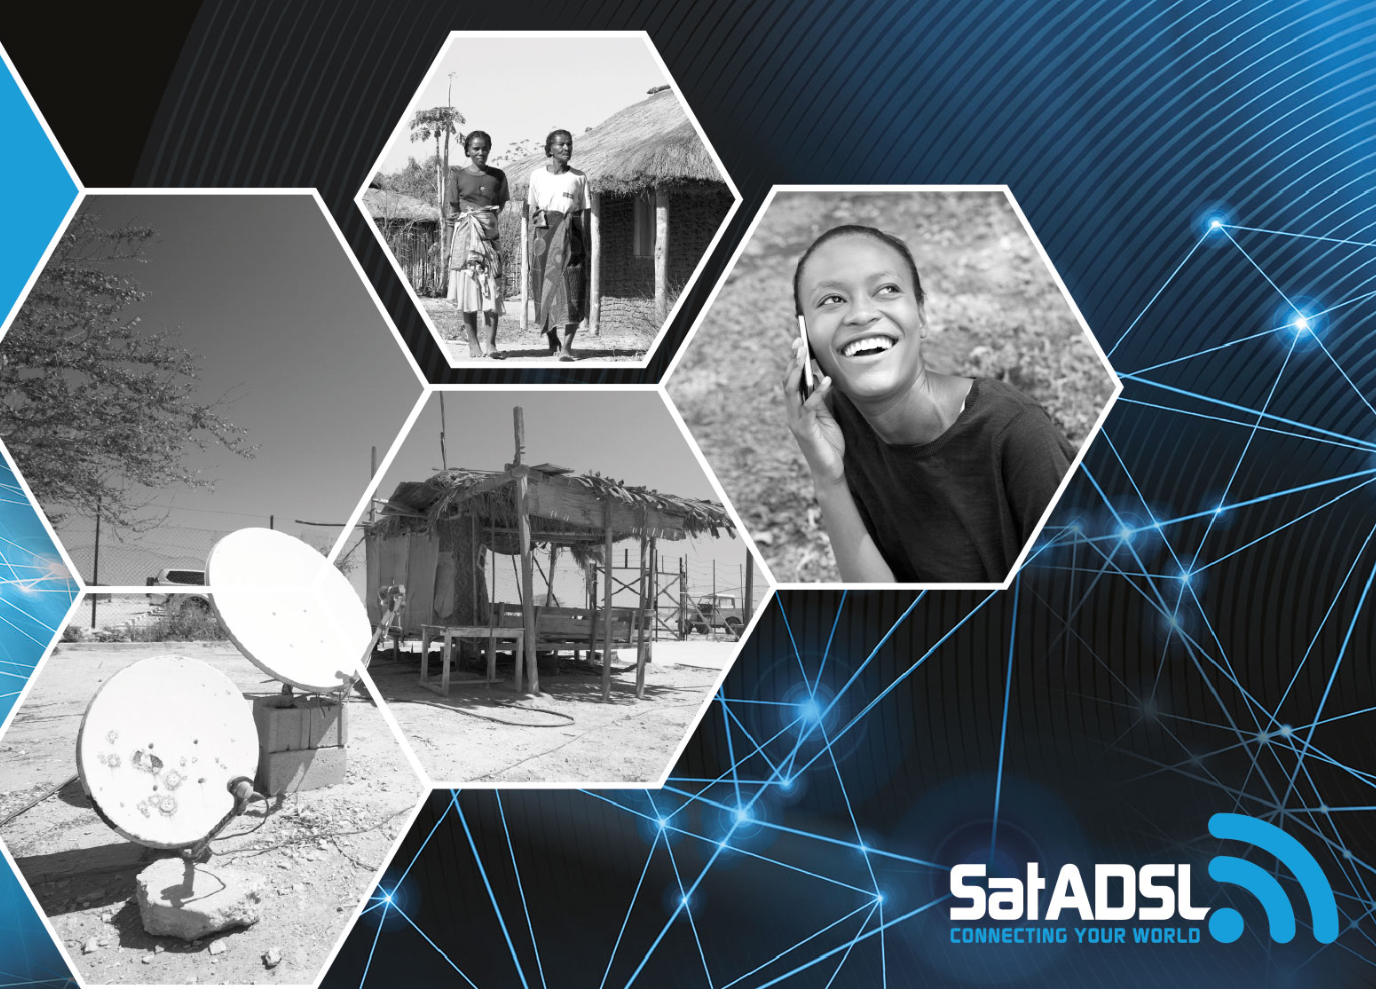 SatADSL services are valuable for larger service providers too. The company has expanded its services across both Africa and Latin America this year. In September 2020, SatADSL signed a partnership with teleport operator Andesat to deliver flexible satellite services to Spanish speaking South American markets. And in April 2020, SatADSL partnered with YahClick, a  Ka-band provider to consumer and enterprise markets in the Middle East, Africa, Brazil, Central and South West Asia, to add additional satellite capacity to the C-SDP  (Image credit: SatADSL)